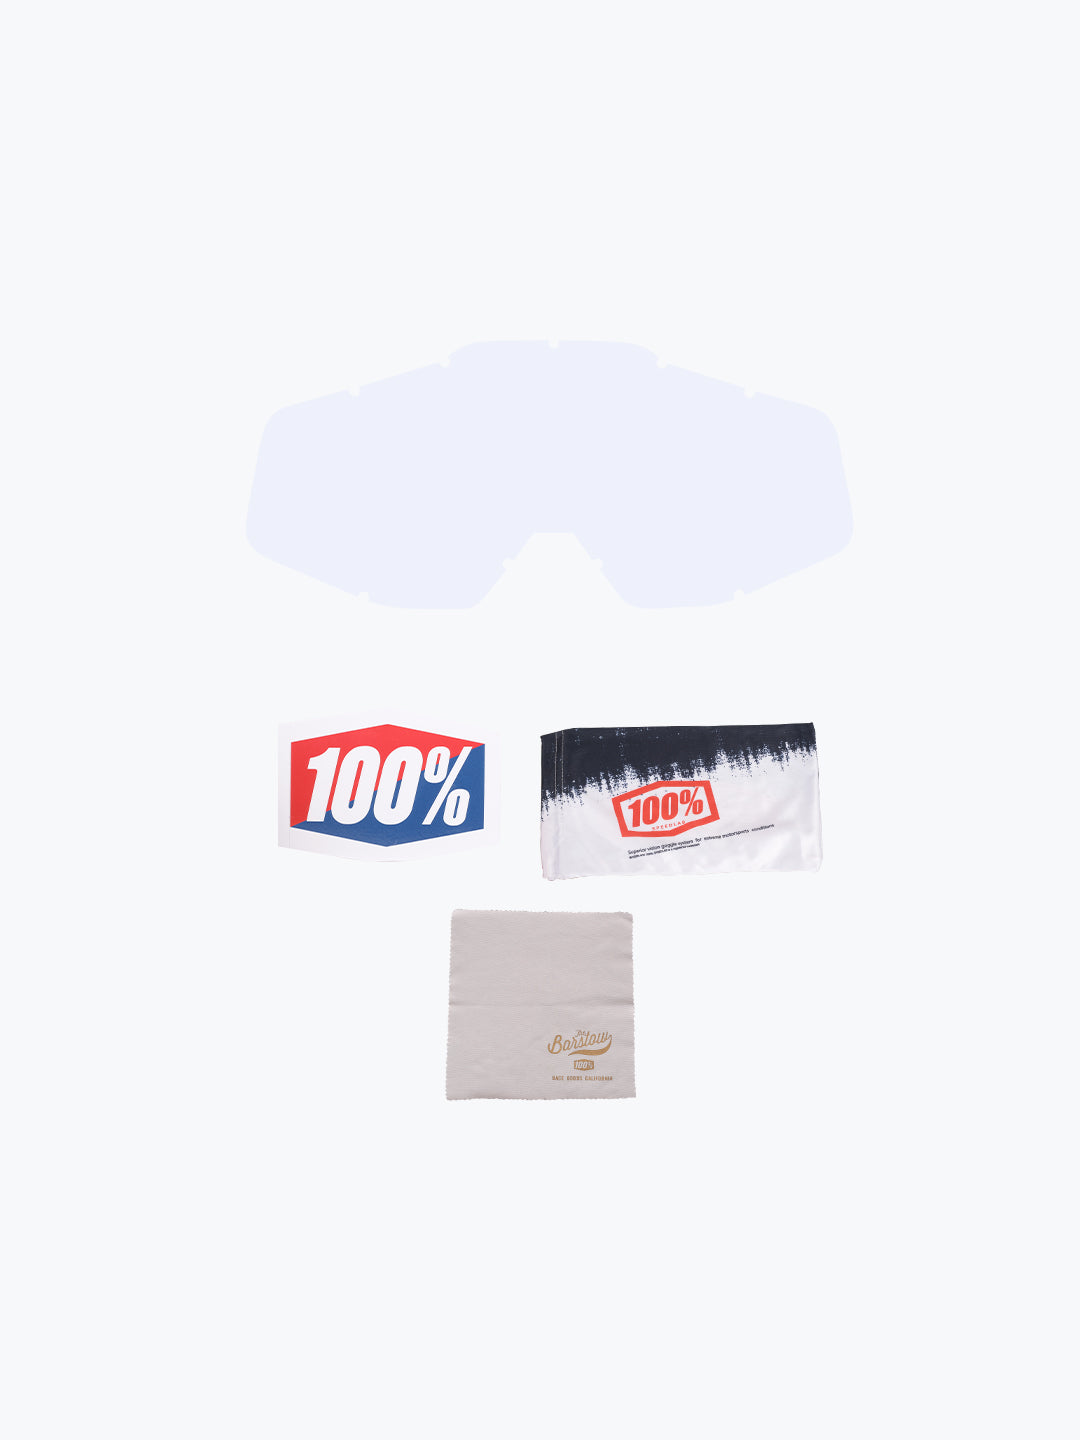 100% Goggles Red Plain